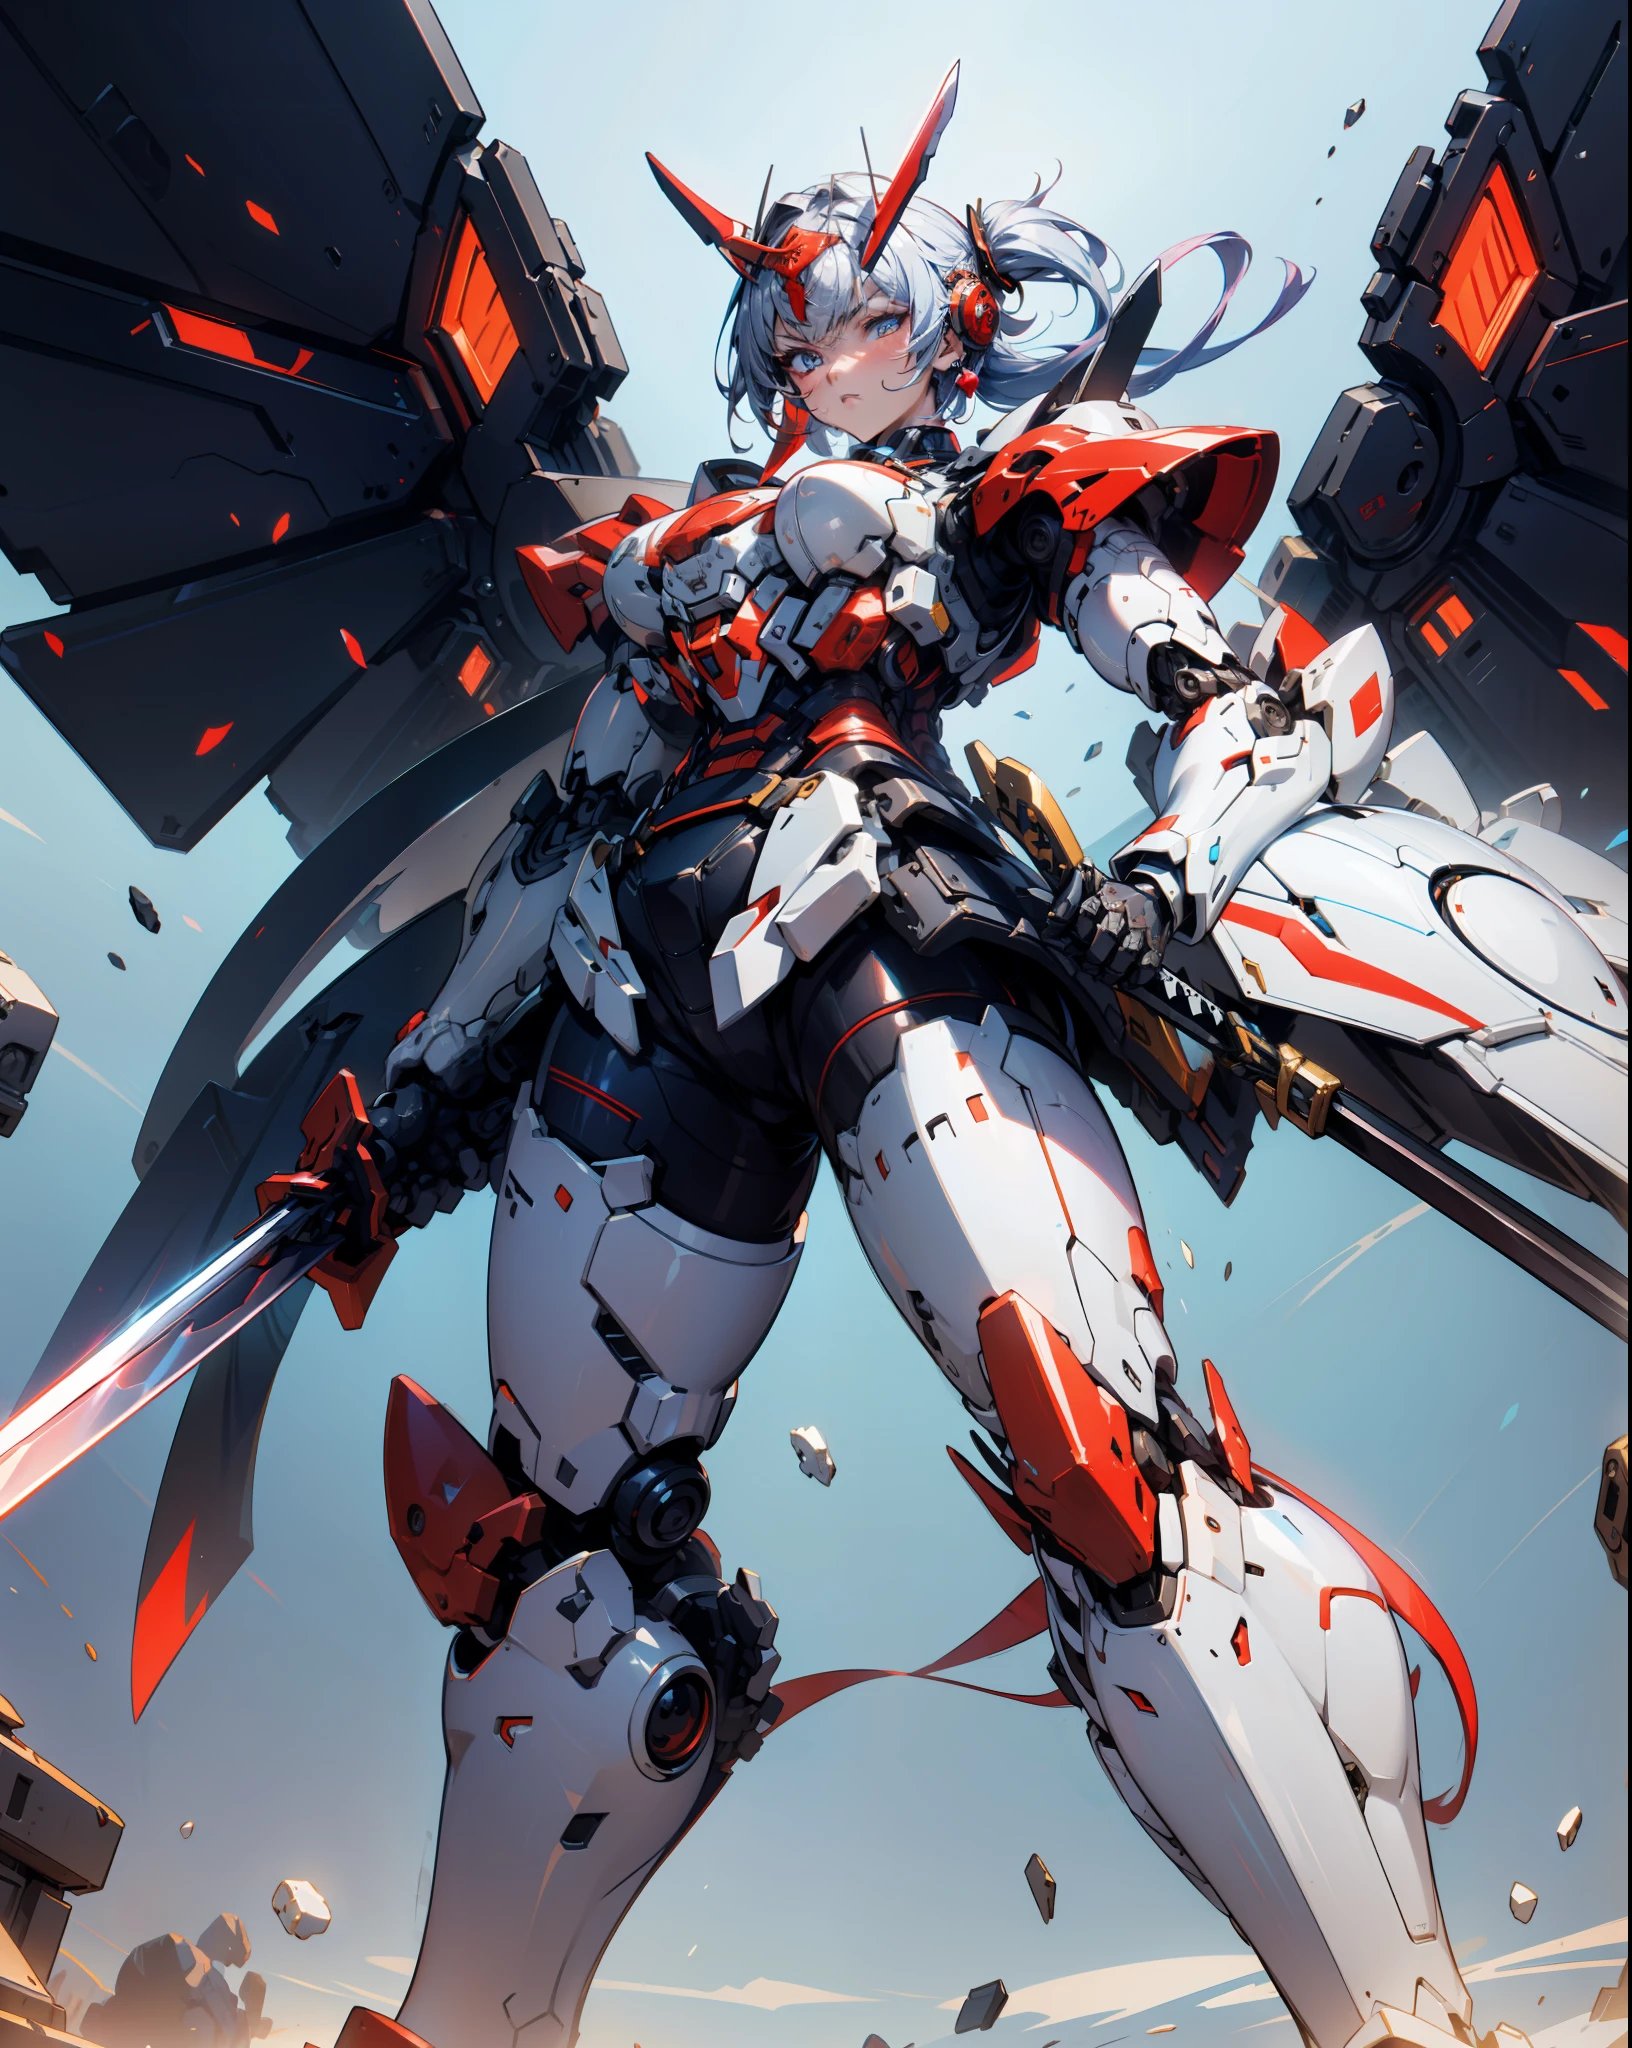 hyper quality, Hyper Detailed,Perfect drawing,Solo, Beautiful Girl, ​master piece, (mecha musume), Mechanical armor, Headgear, mechanical wings, holding huge gunSamurai wielding a sword, Black ponytail, Hair tied up with a large red ribbon, Equipped with two Japan swords ((extra huge oversize cool samurai_sword in hands, extra huge cool weapon machine)), open stance, actionpose,purgatory,